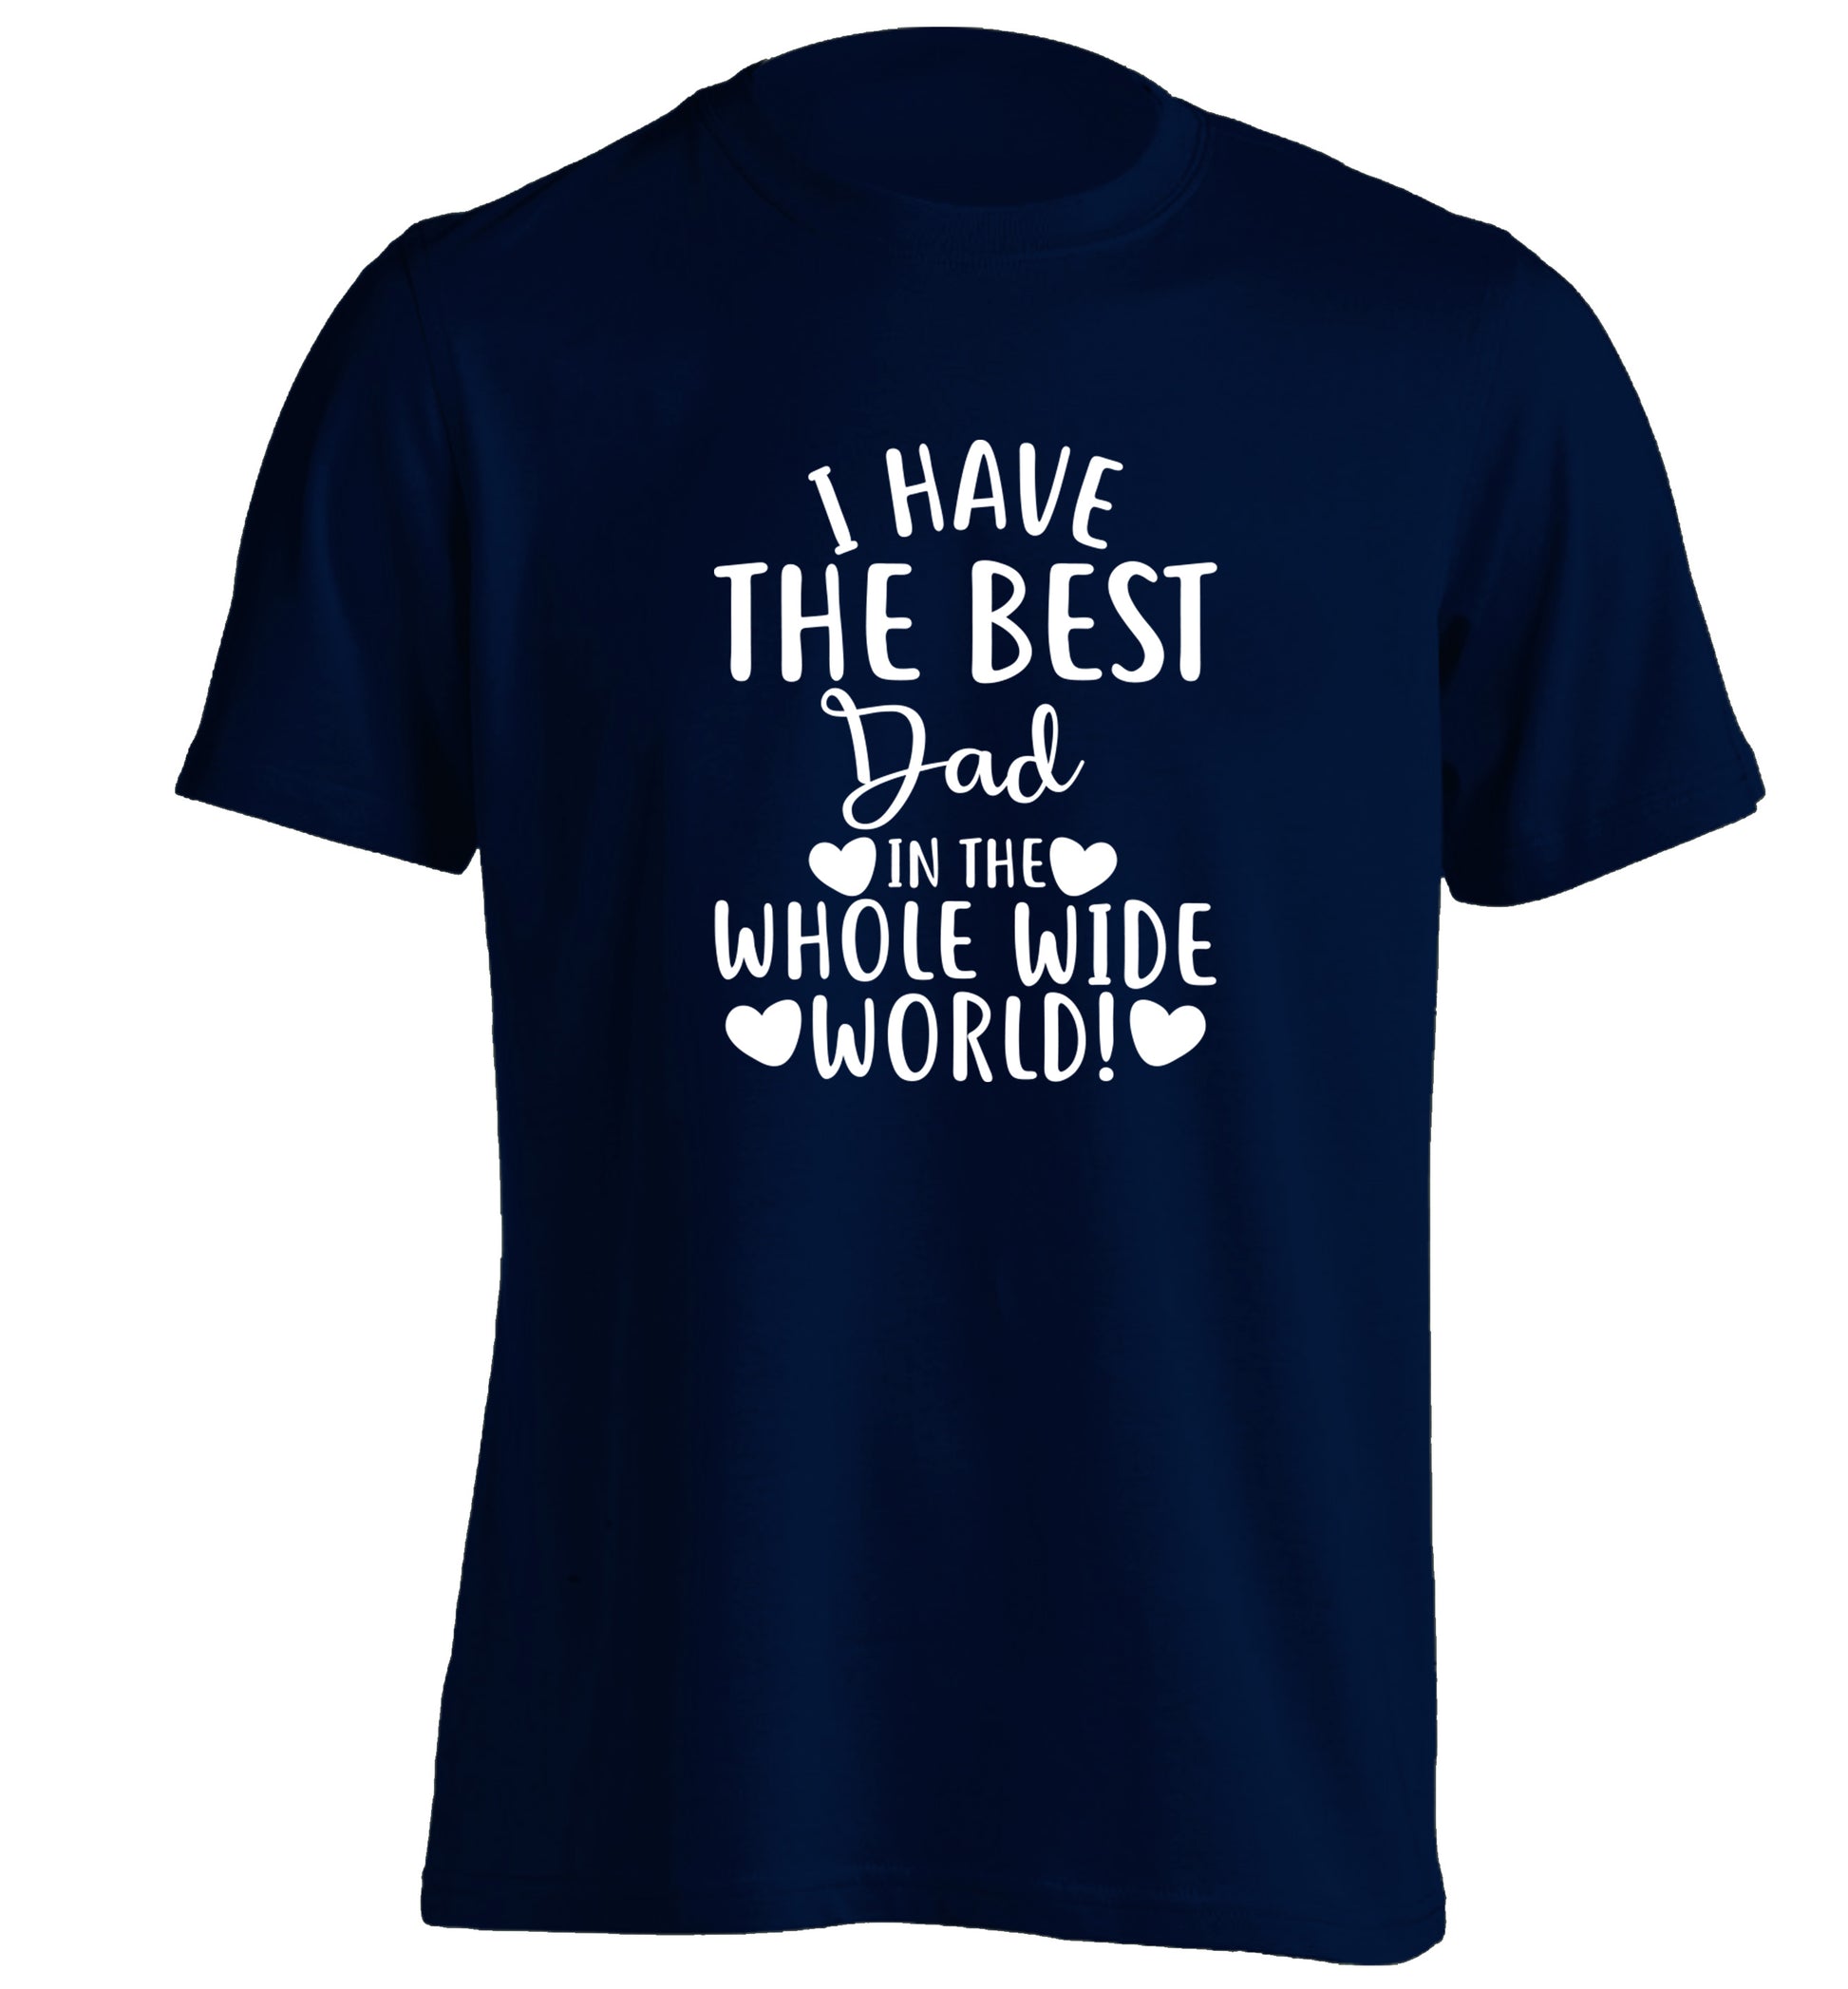 I have the best dad in the whole wide world! adults unisex navy Tshirt 2XL